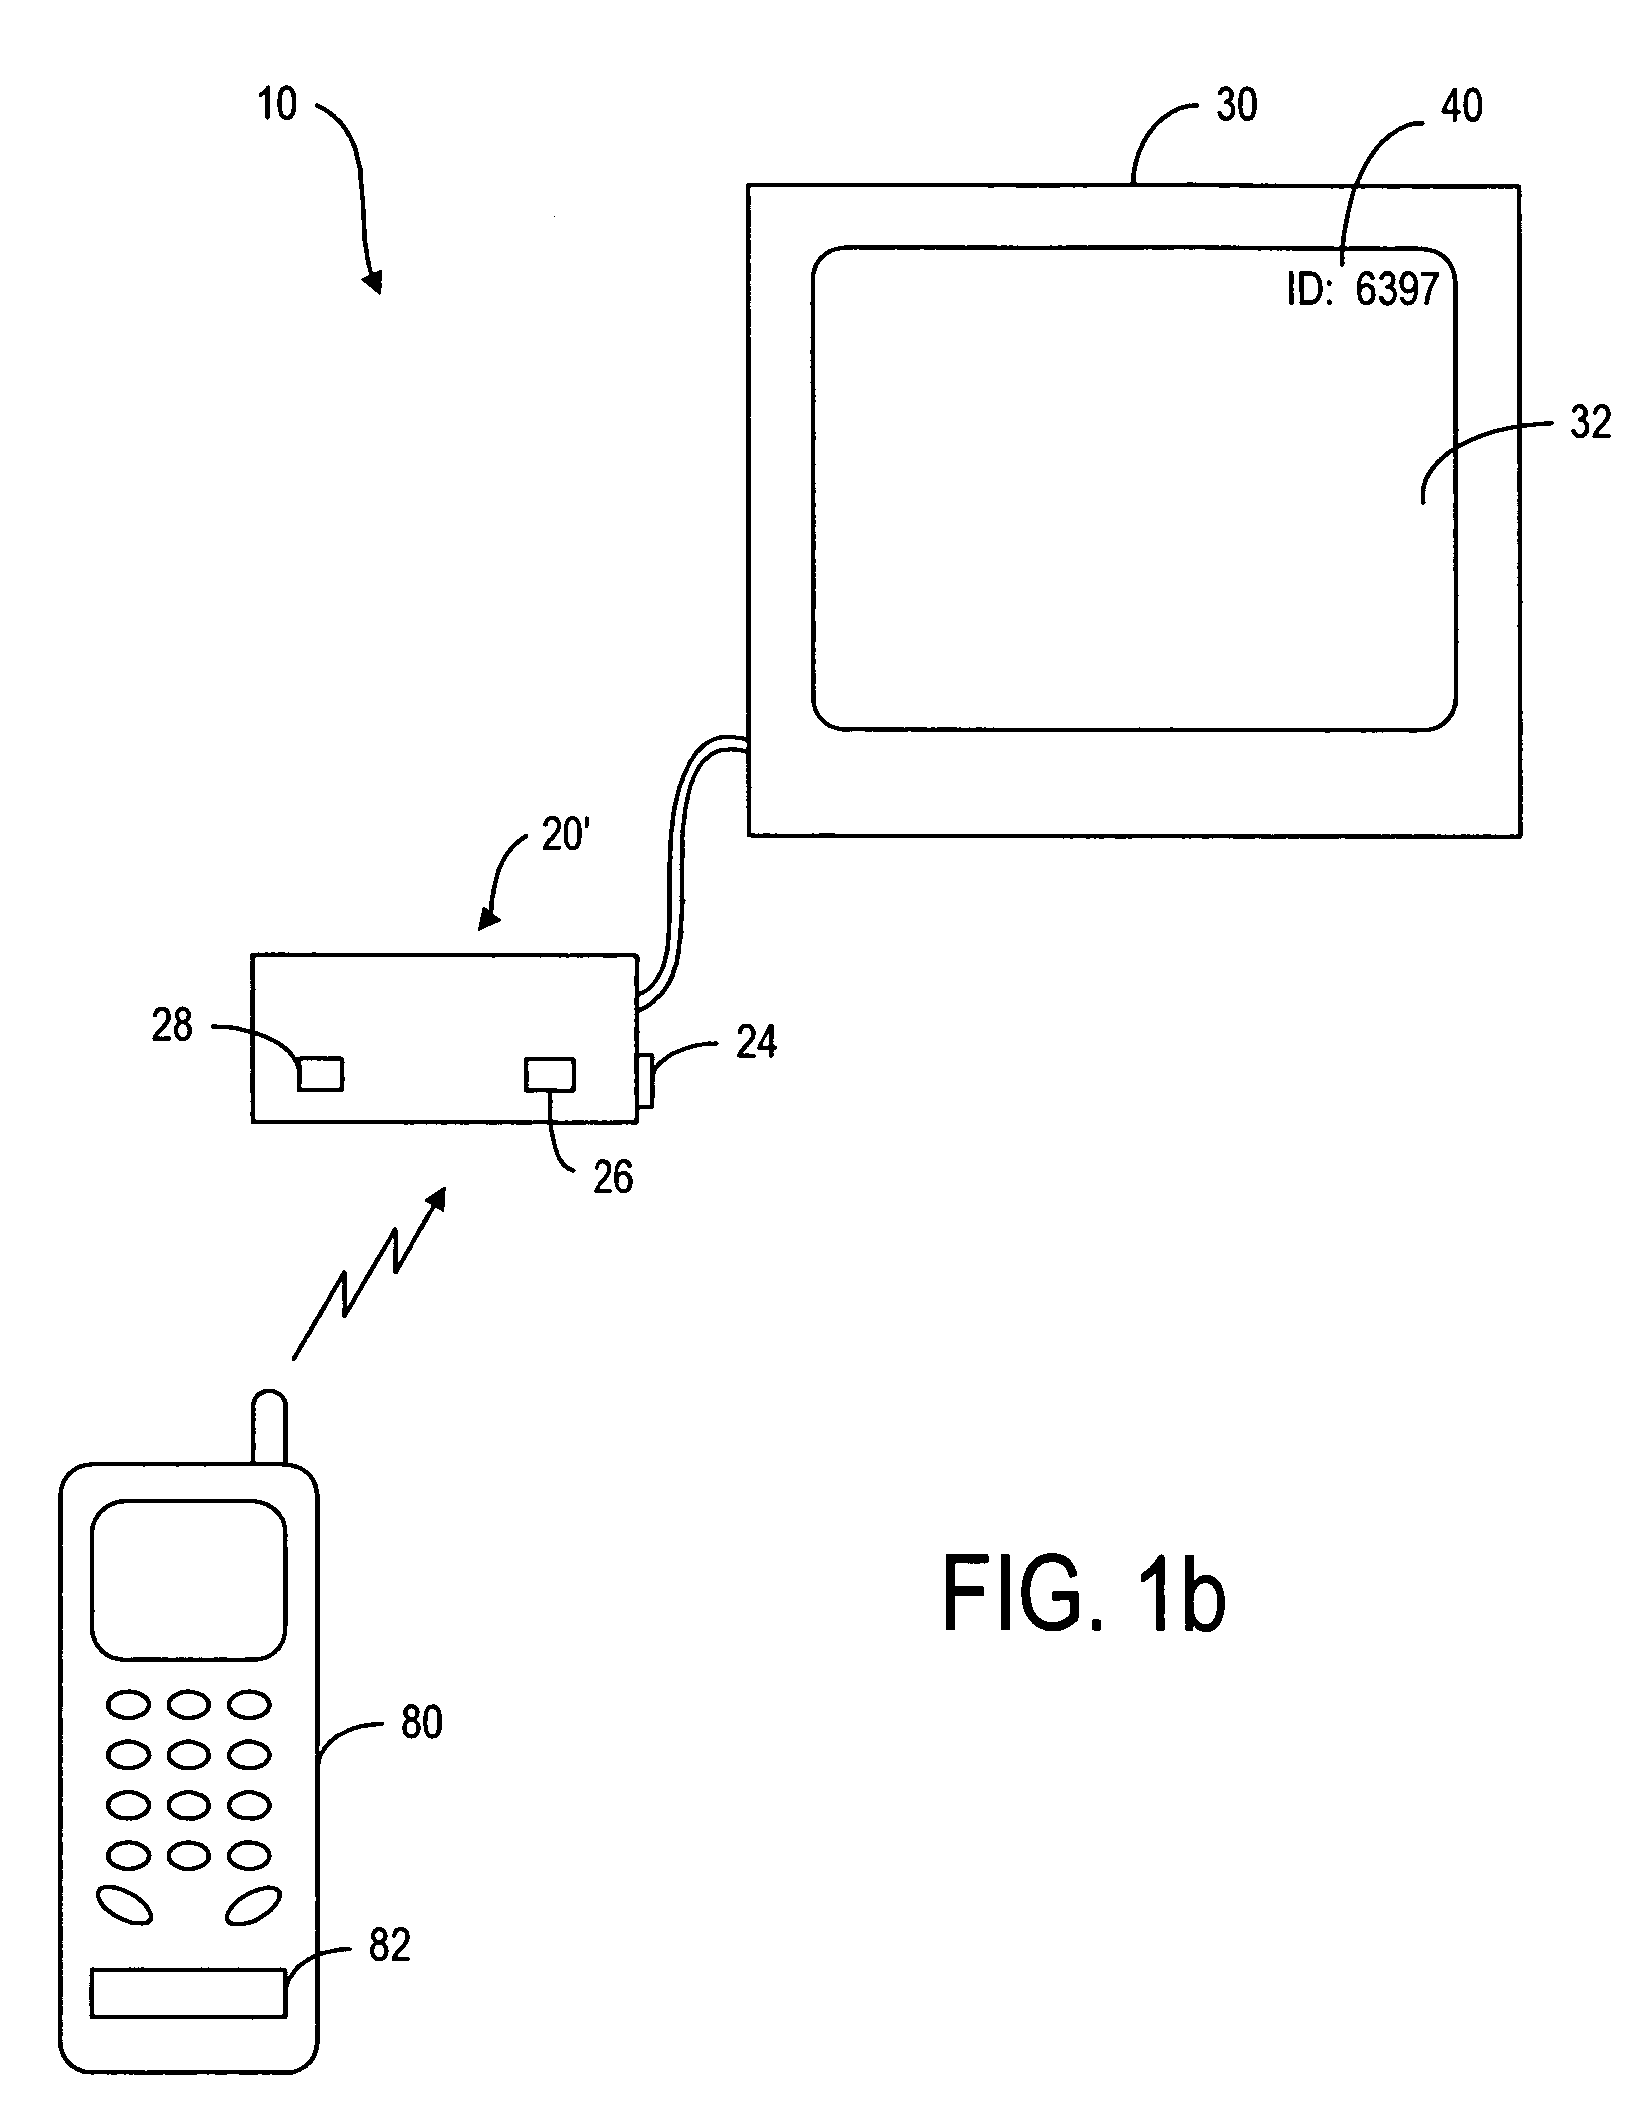 Method and device for identifying and pairing Bluetooth devices